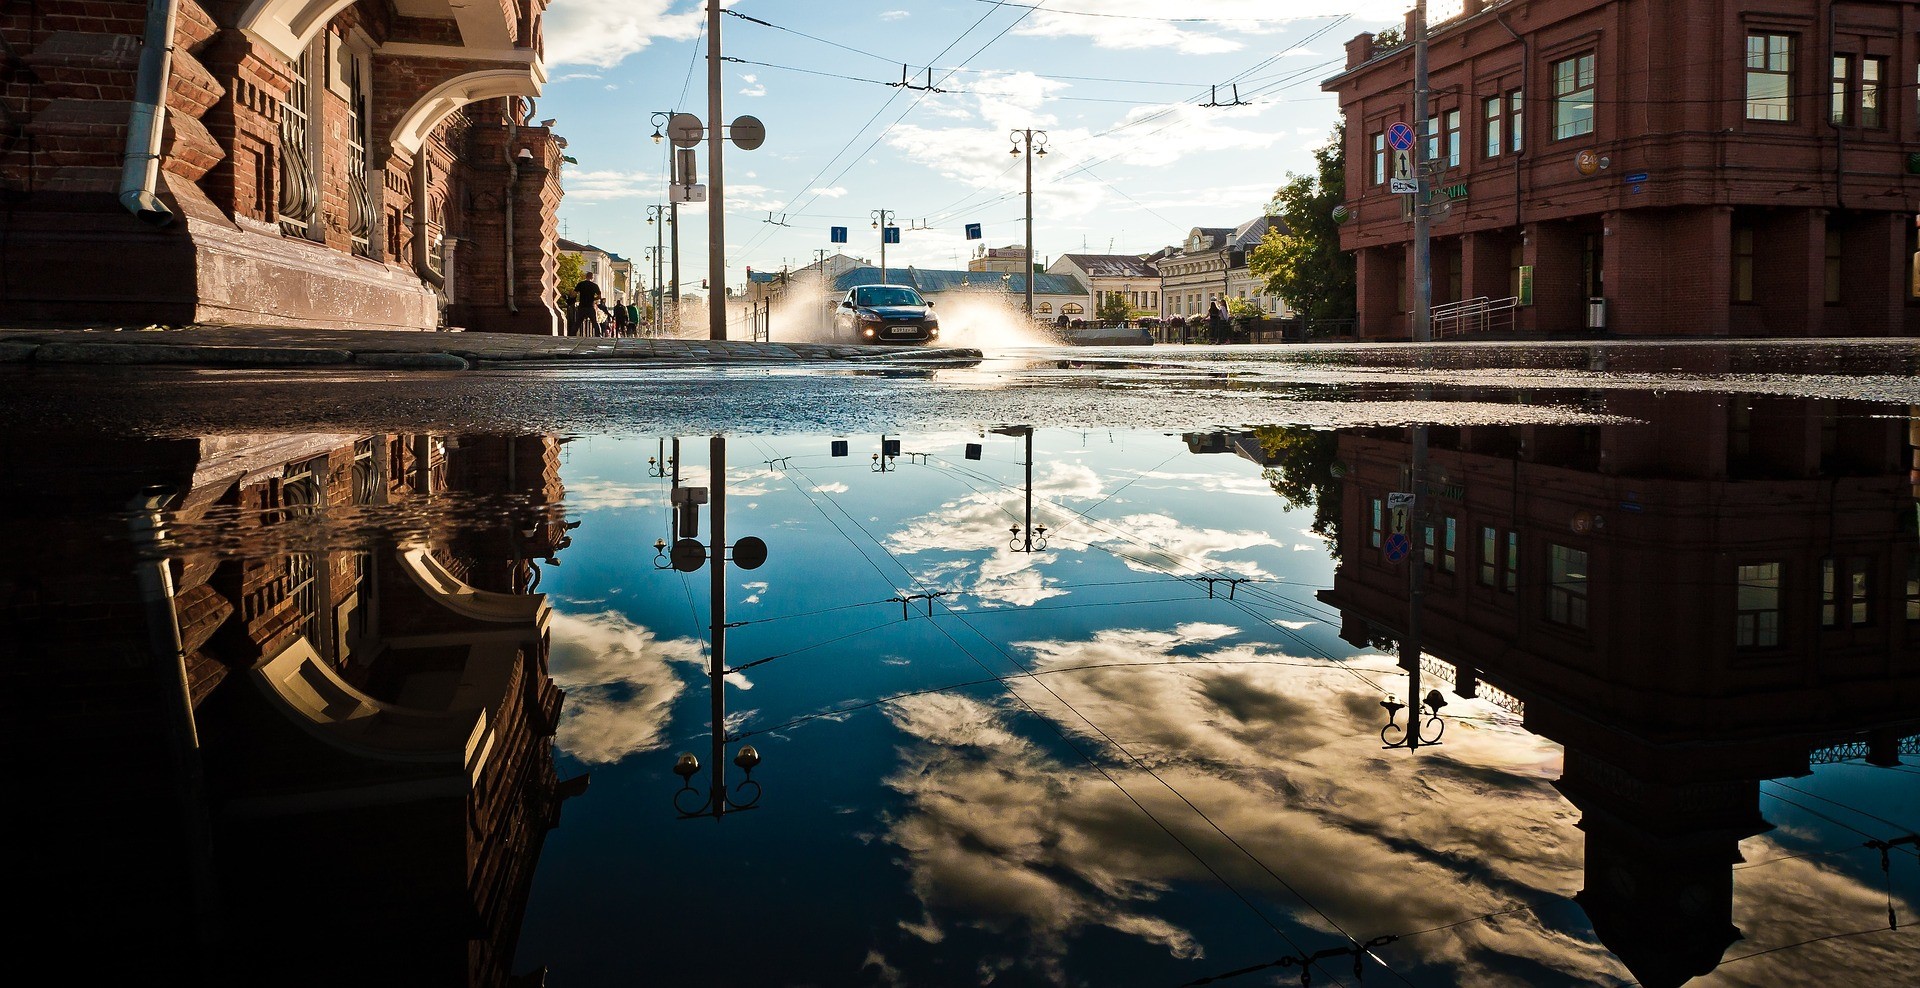 A puddle on a city street